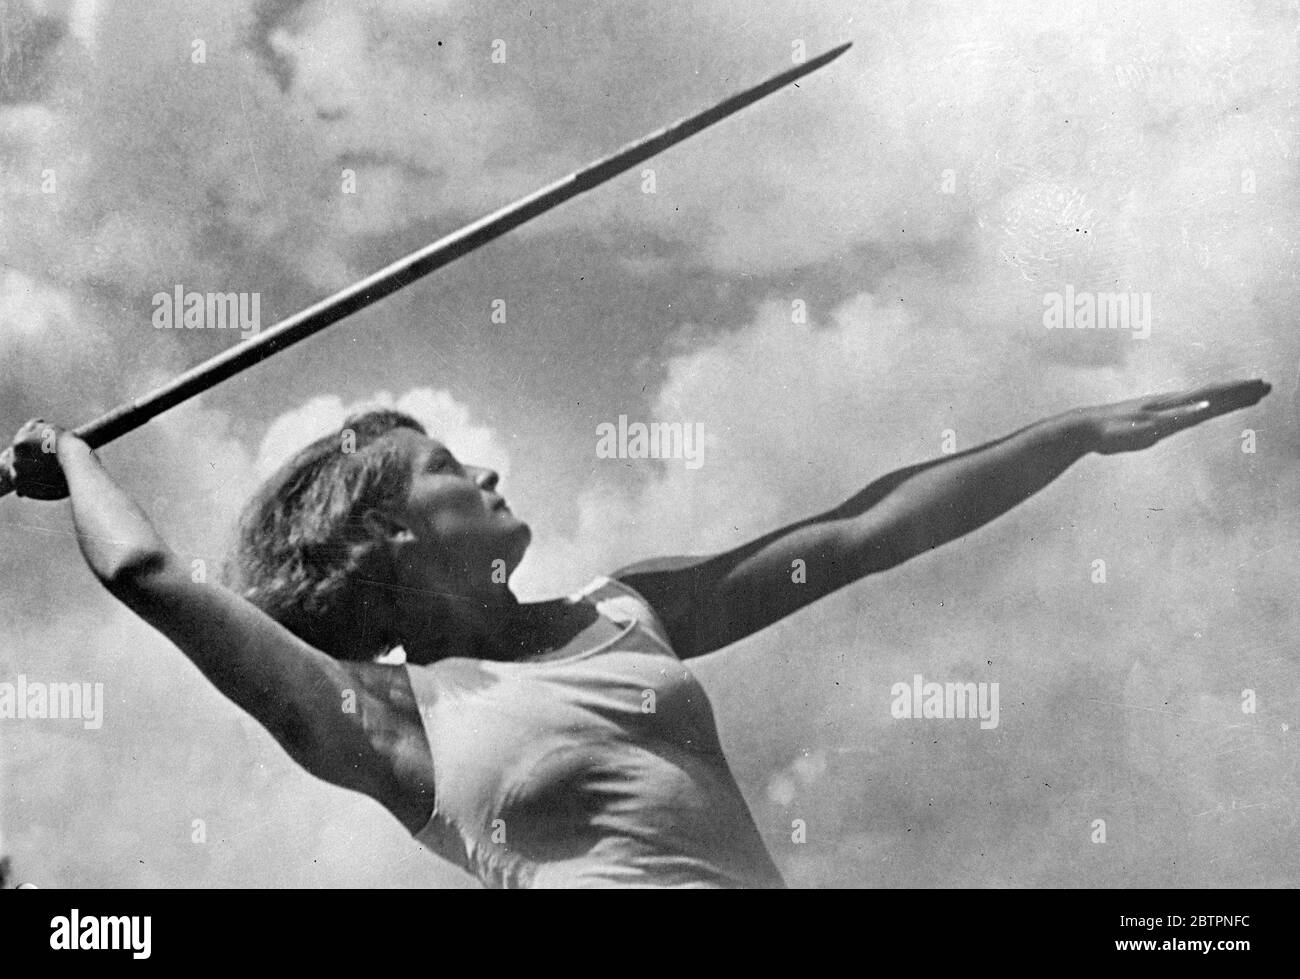 Russian photographic exhibition in London. An exhibition of modern Russian photography has been opened at the Royal photographic Society's headquarters in Russell Square, Bloomsbury, London. M Maisky, Soviet Ambassador, was one of the first visitors. Photo shows, ' lance throwing', by I M Shagin. 17 June 1937 Stock Photo